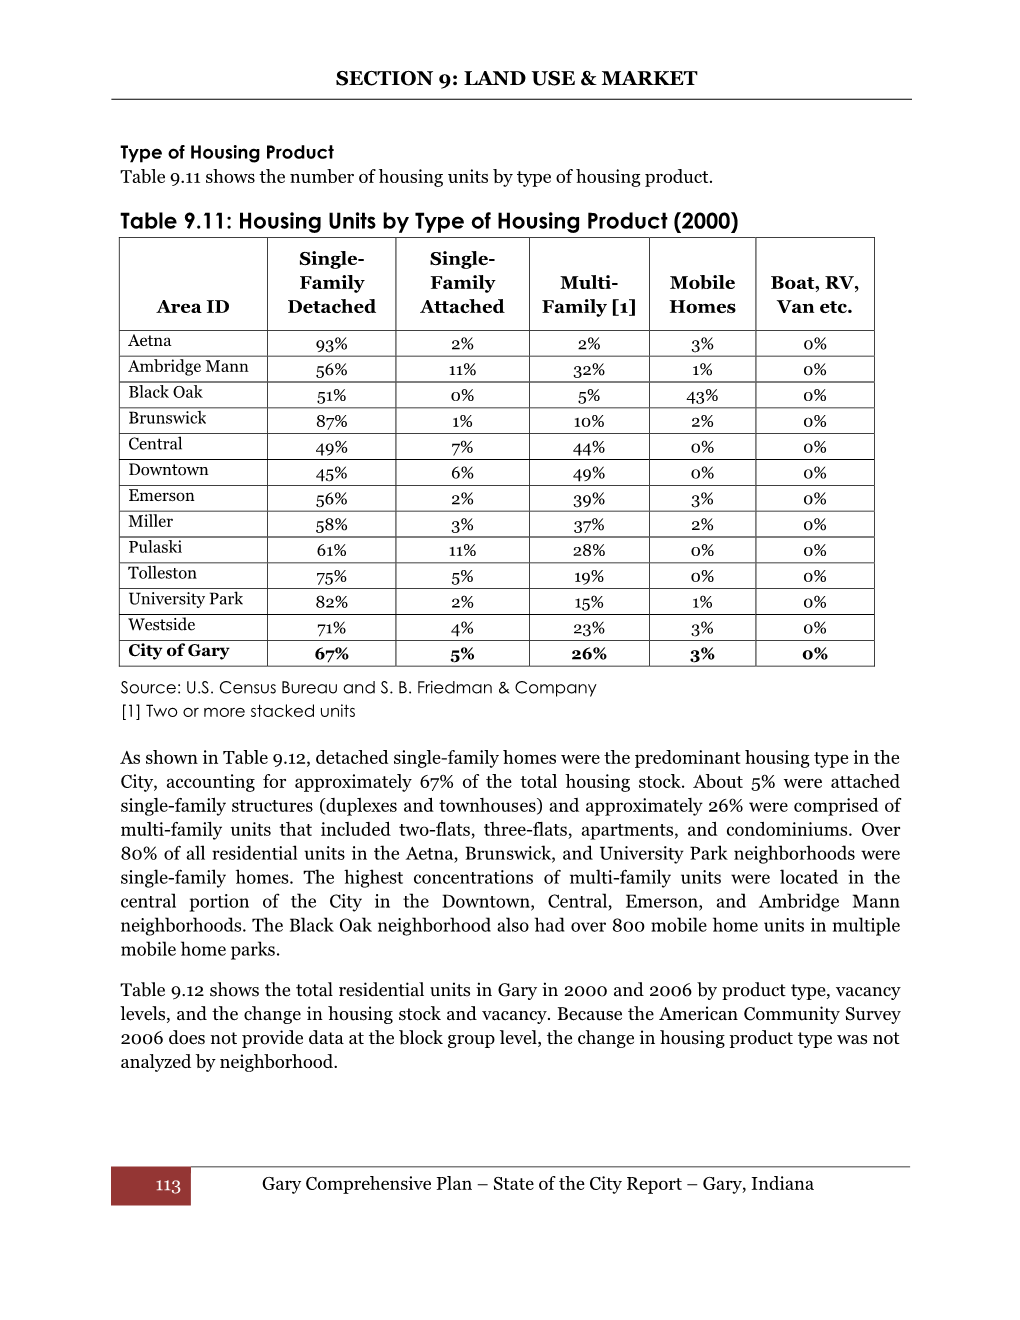 Table 9.11: Housing Units by Type of Housing Product (2000)